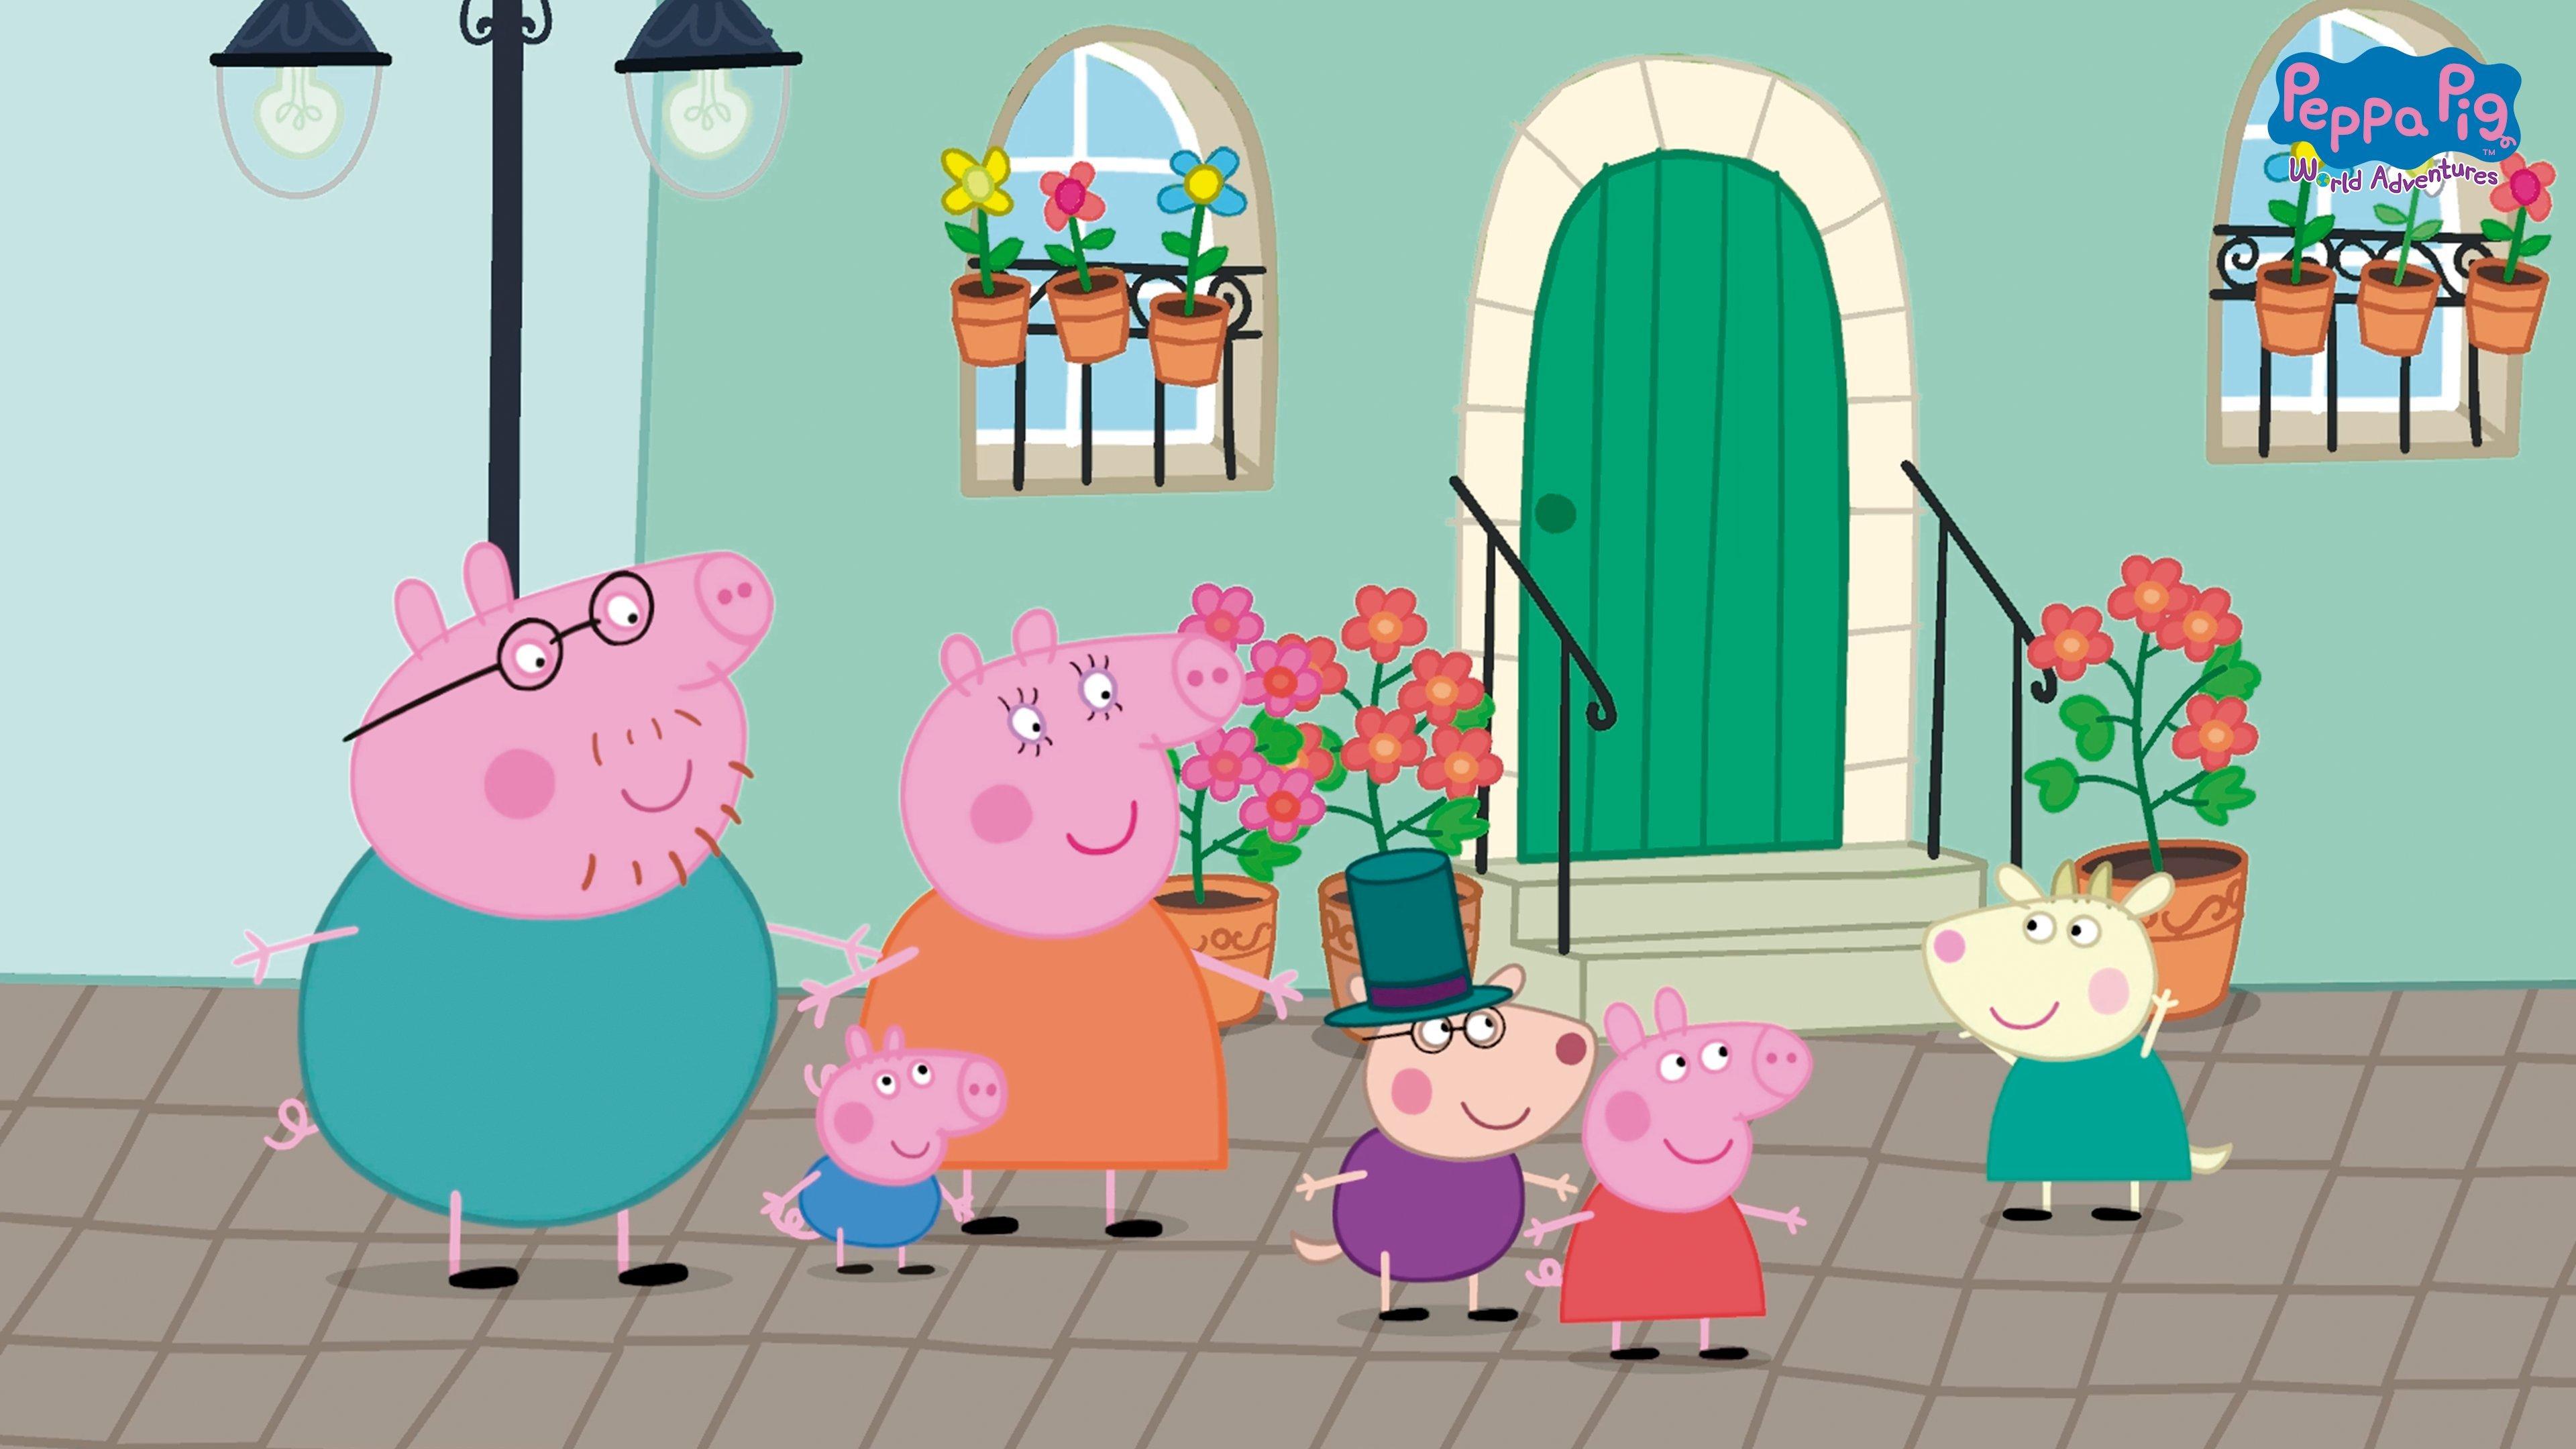 Peppa Pig: World Adventures Review (Xbox Series) - Globe Trotter - FG